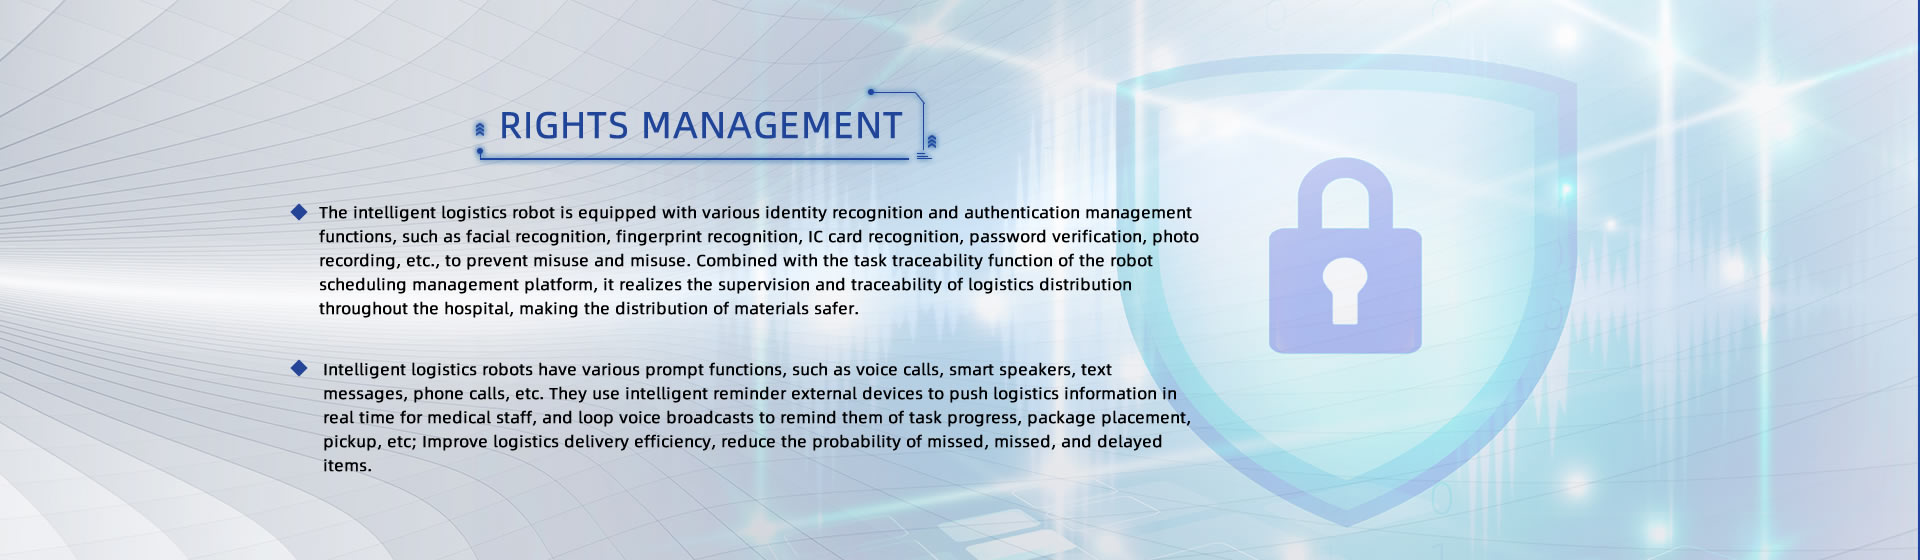 RIGHTS MANAGEMENT: 1.The intelligent logistics robot is equipped with various identity recognition and authentication management functions, such as facial recognition, fingerprint recognition, IC card recognition, password verification, photo recording, etc., to prevent misuse and misuse. Combined with the task traceability function of the robot scheduling management platform, it realizes the supervision and traceability of logistics distribution throughout the hospital, making the distribution of materials safer; 2.Intelligent logistics robots have various prompt functions, such as voice calls, smart speakers, text messages, phone calls, etc. They use intelligent reminder external devices to push logistics information in real time for medical staff, and loop voice broadcasts to remind them of task progress, package placement, pickup, etc; Improve logistics delivery efficiency, reduce the probability of missed, missed, and delayed items.